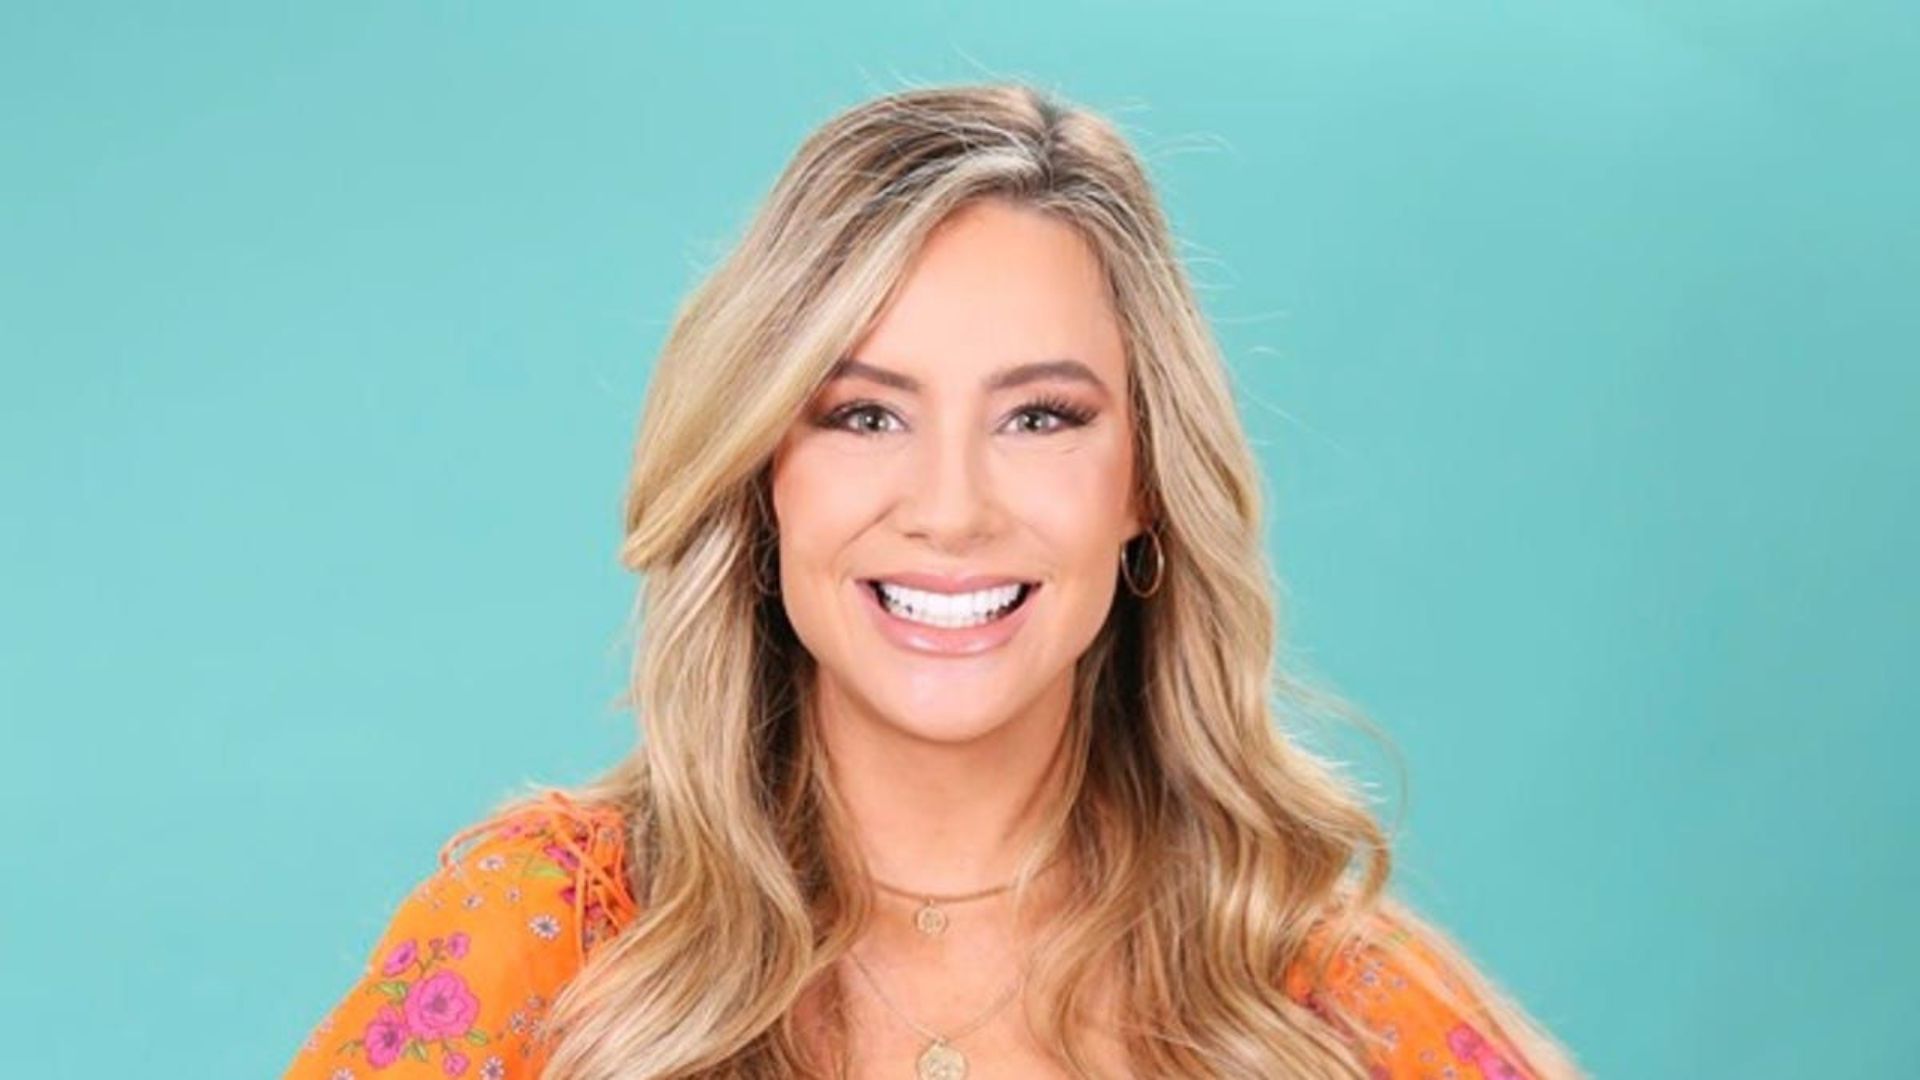 Bachelor In Paradise' Victoria P's Plastic Surgery